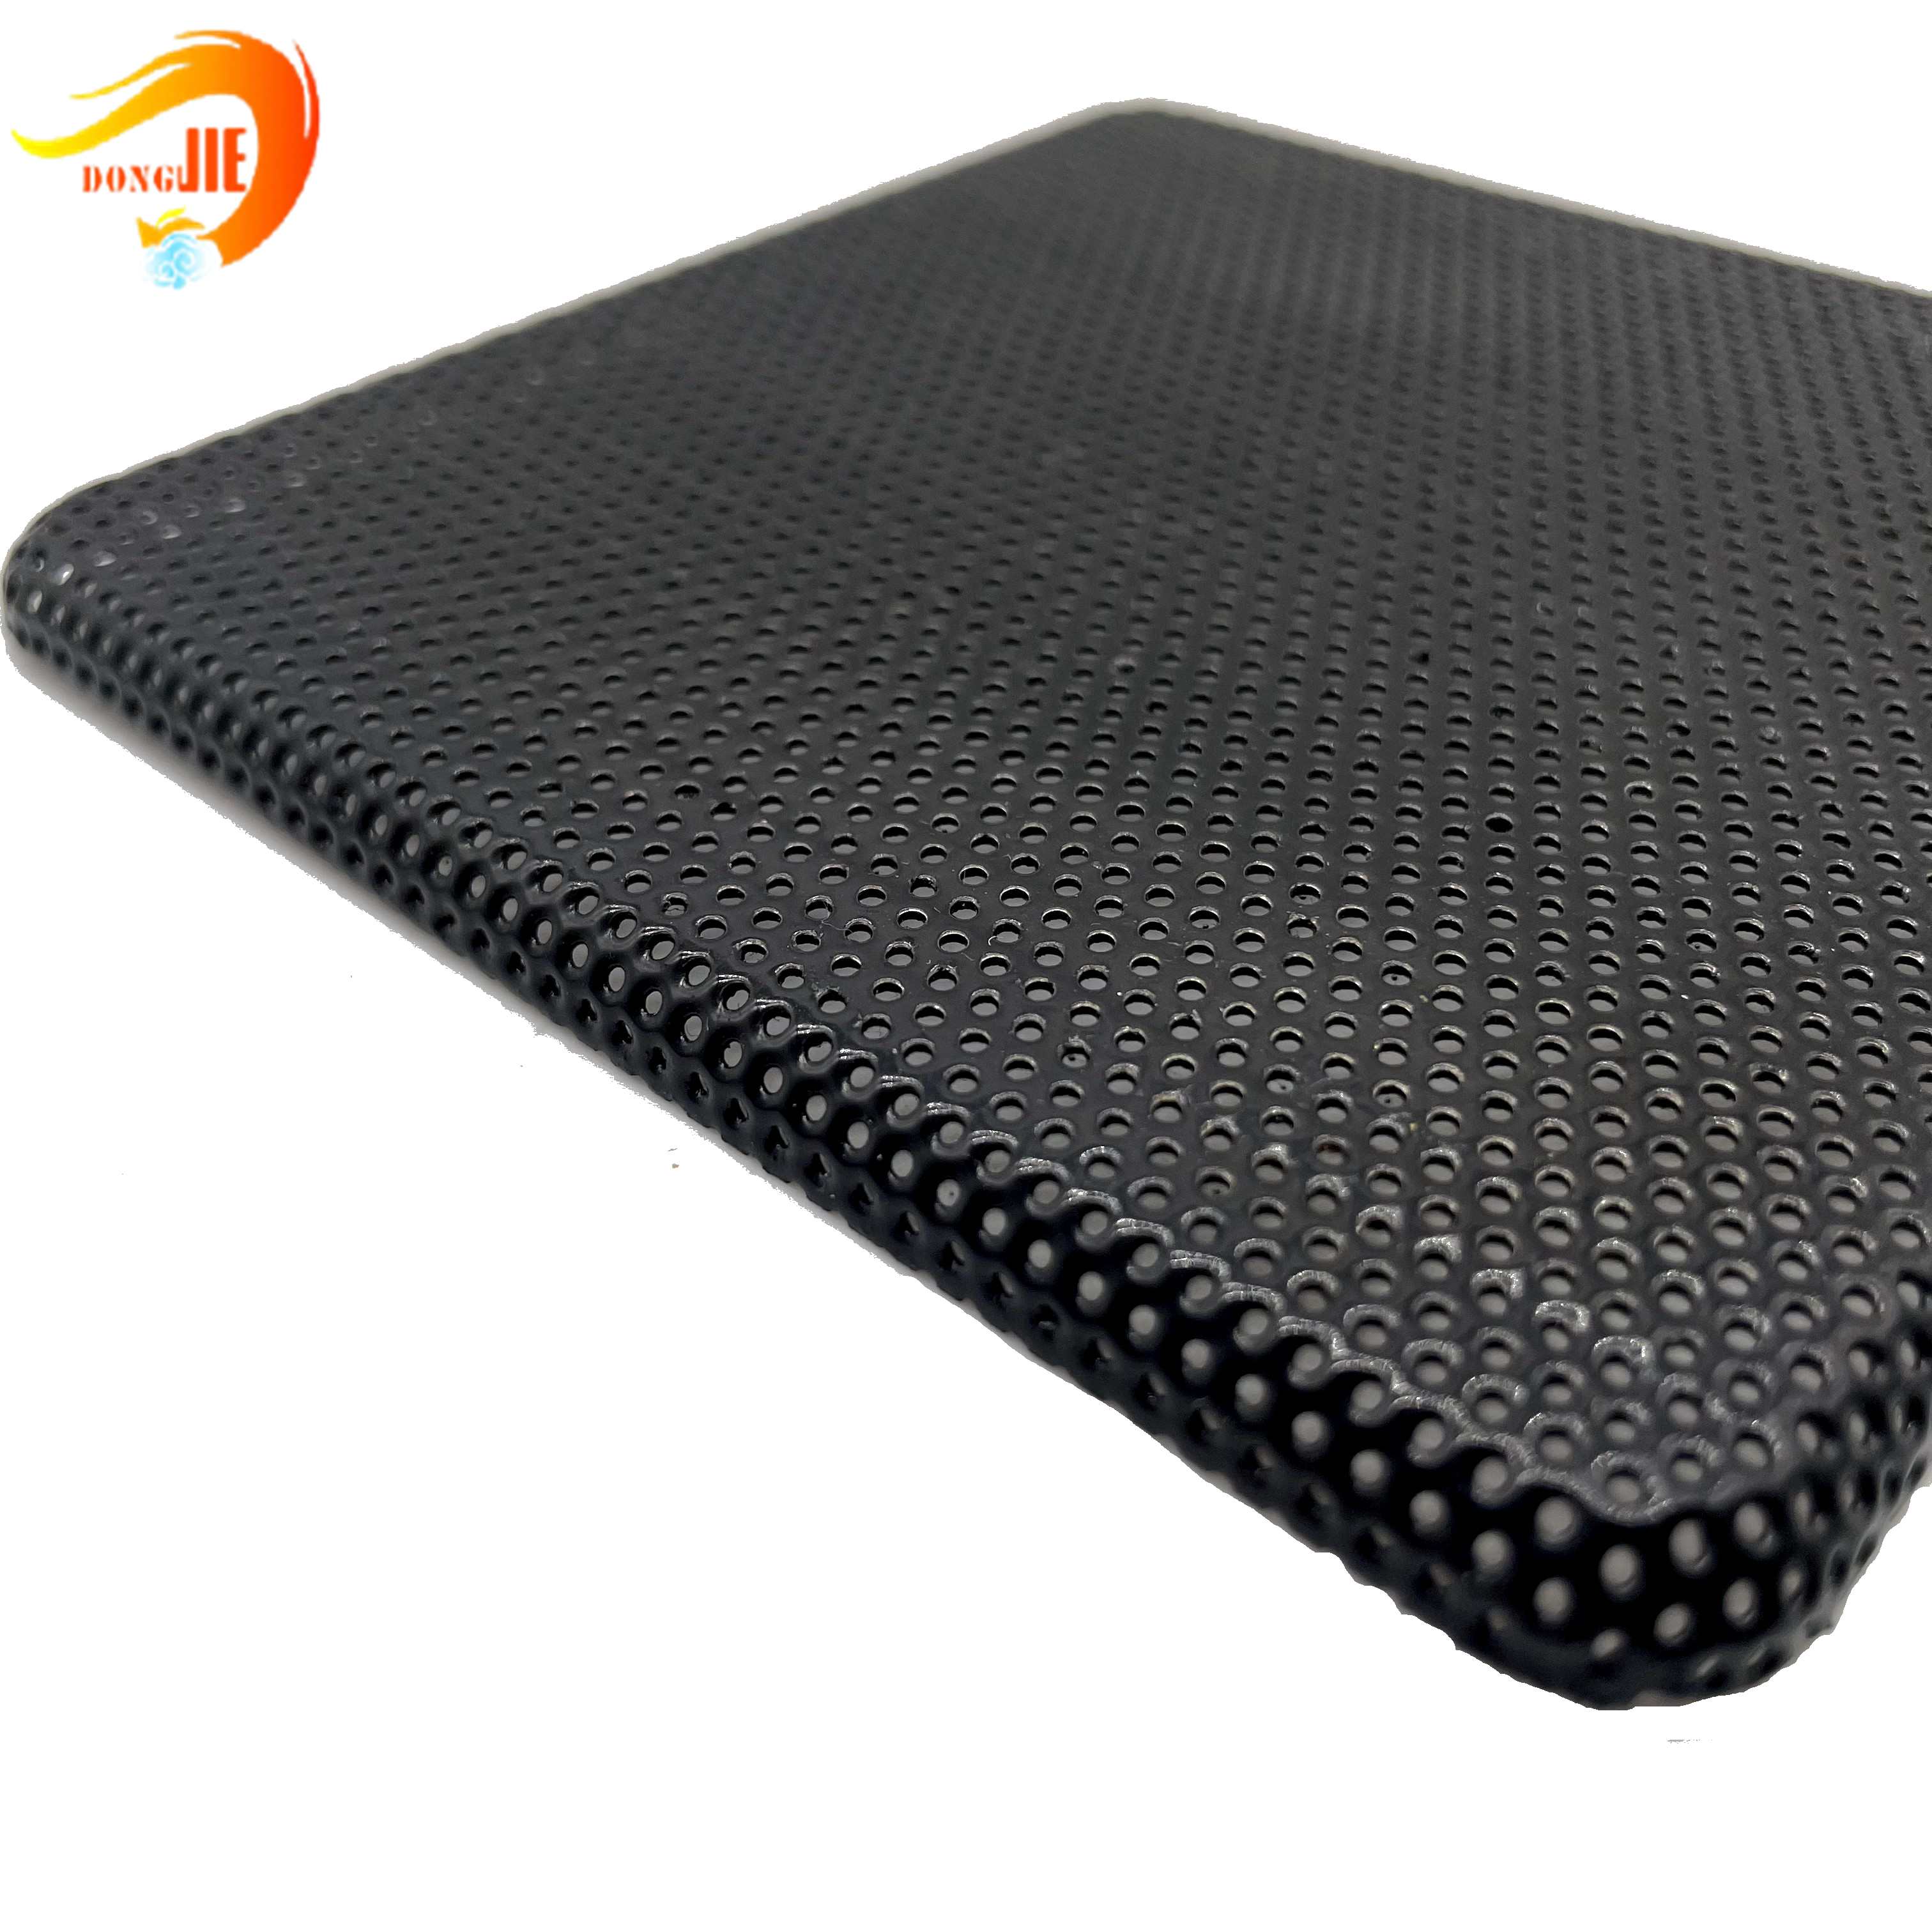 High definition Perforated Panels - Black perforated metal speaker grill protection grill – Dongjie